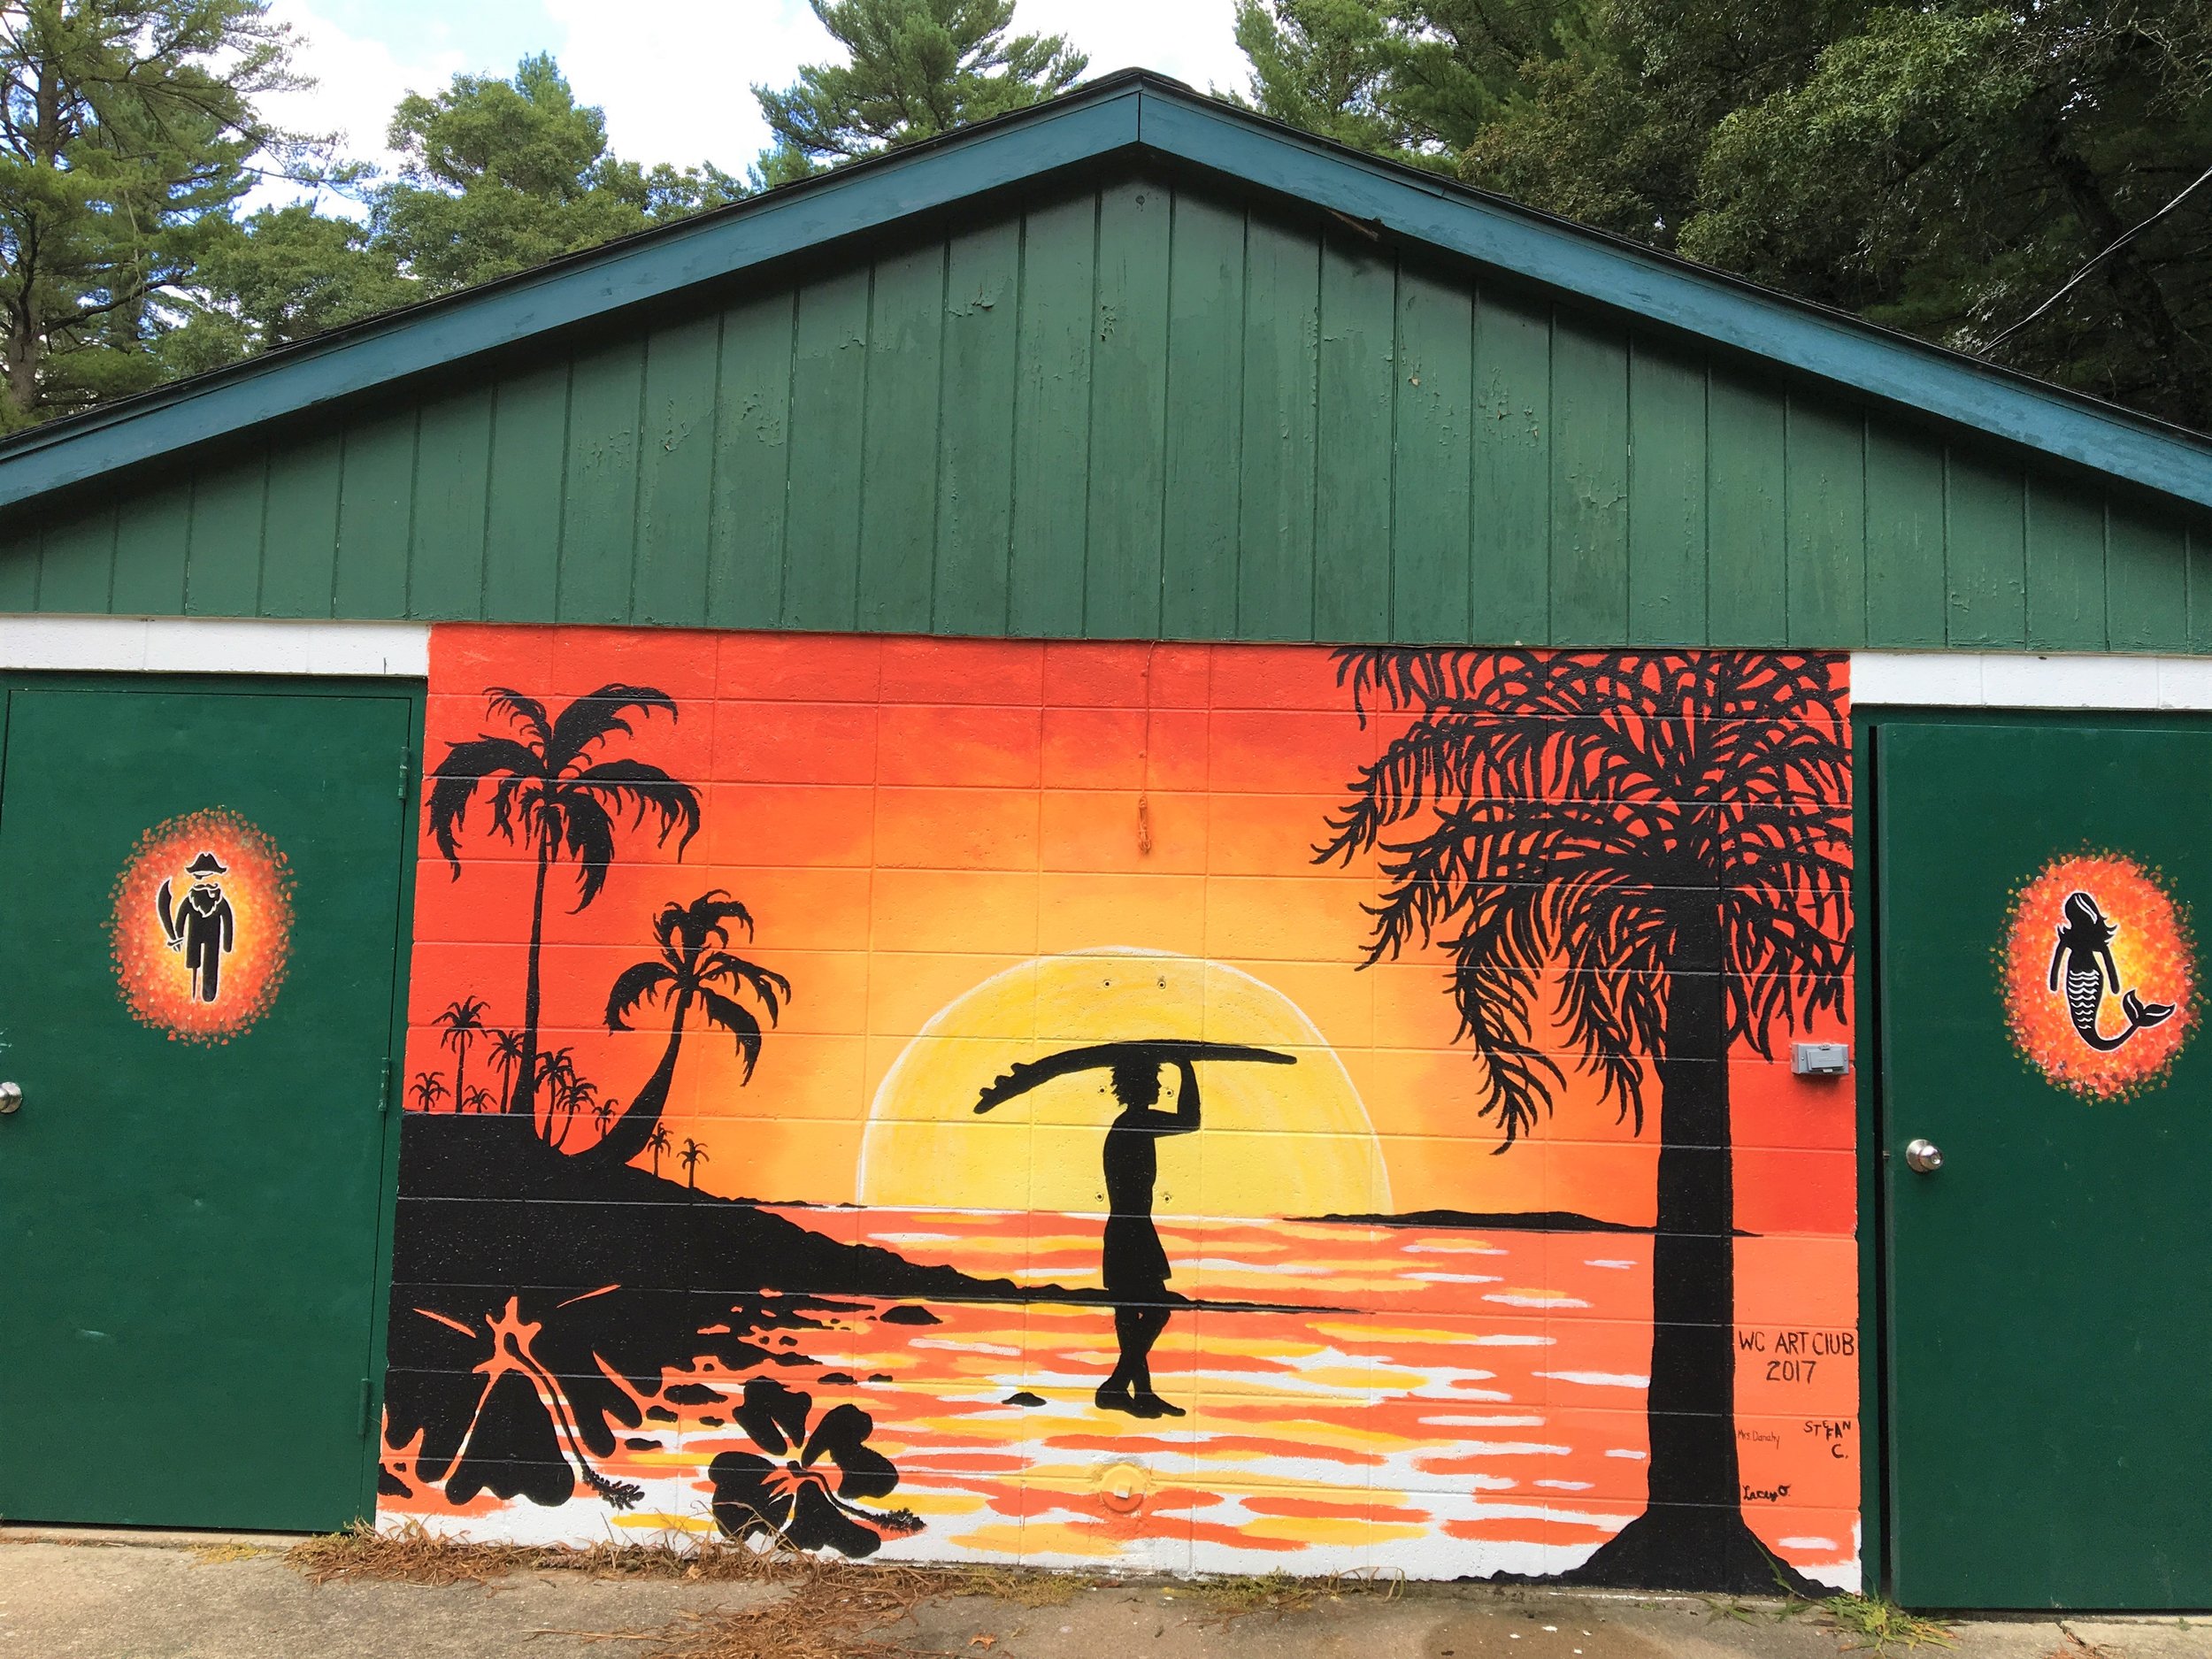   This beach scene painting at the Wonewoc swimming pool impressed Bill Huebel , leading him to contact its creator, art teacher Megan Danahy at Wonewoc-Center Schools.  